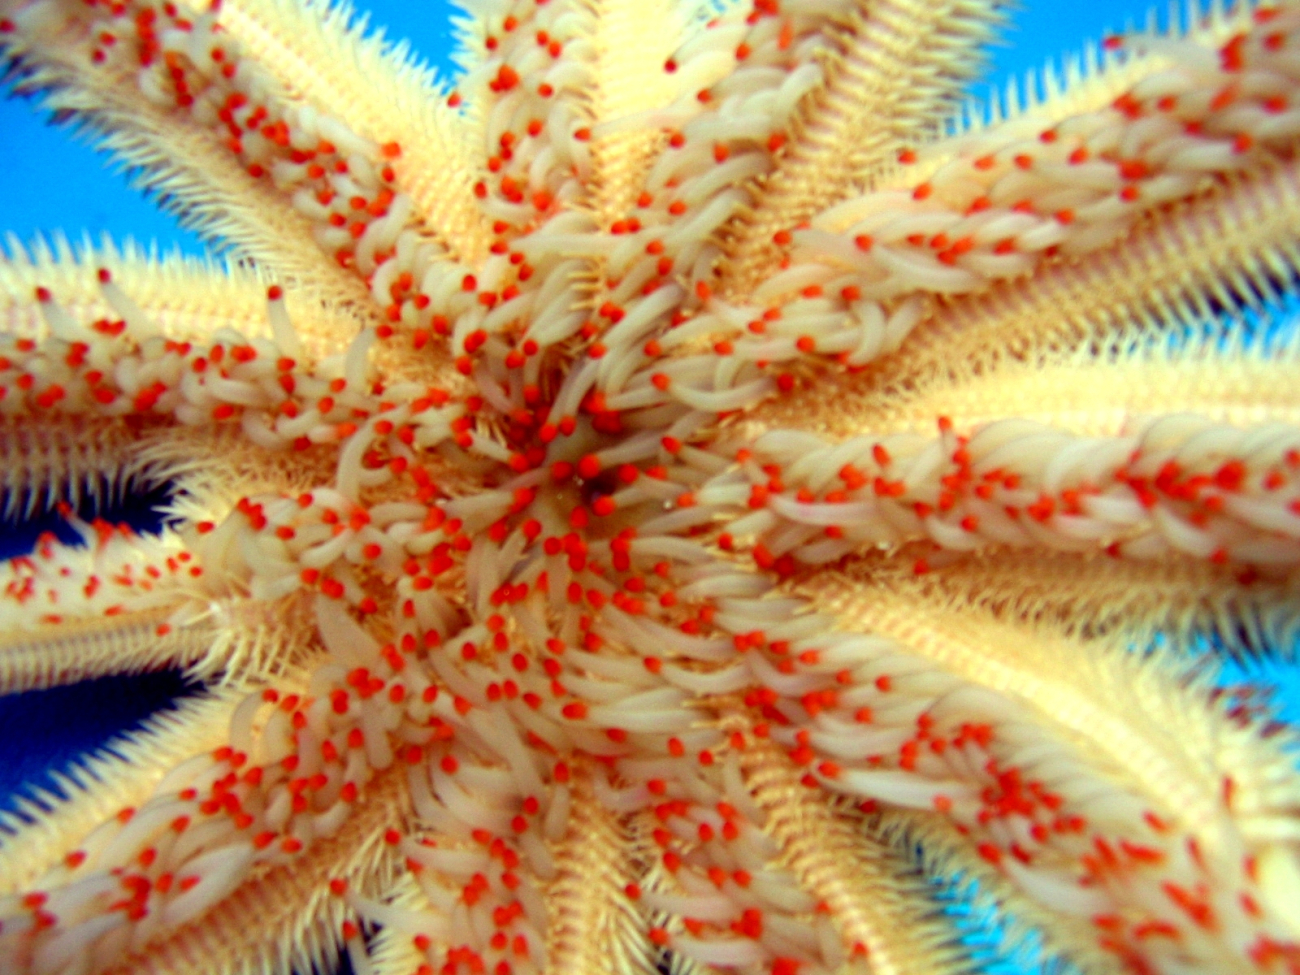 Mouth of Magnificent Star starfish (Luidia magnifica) - note regenerating legs